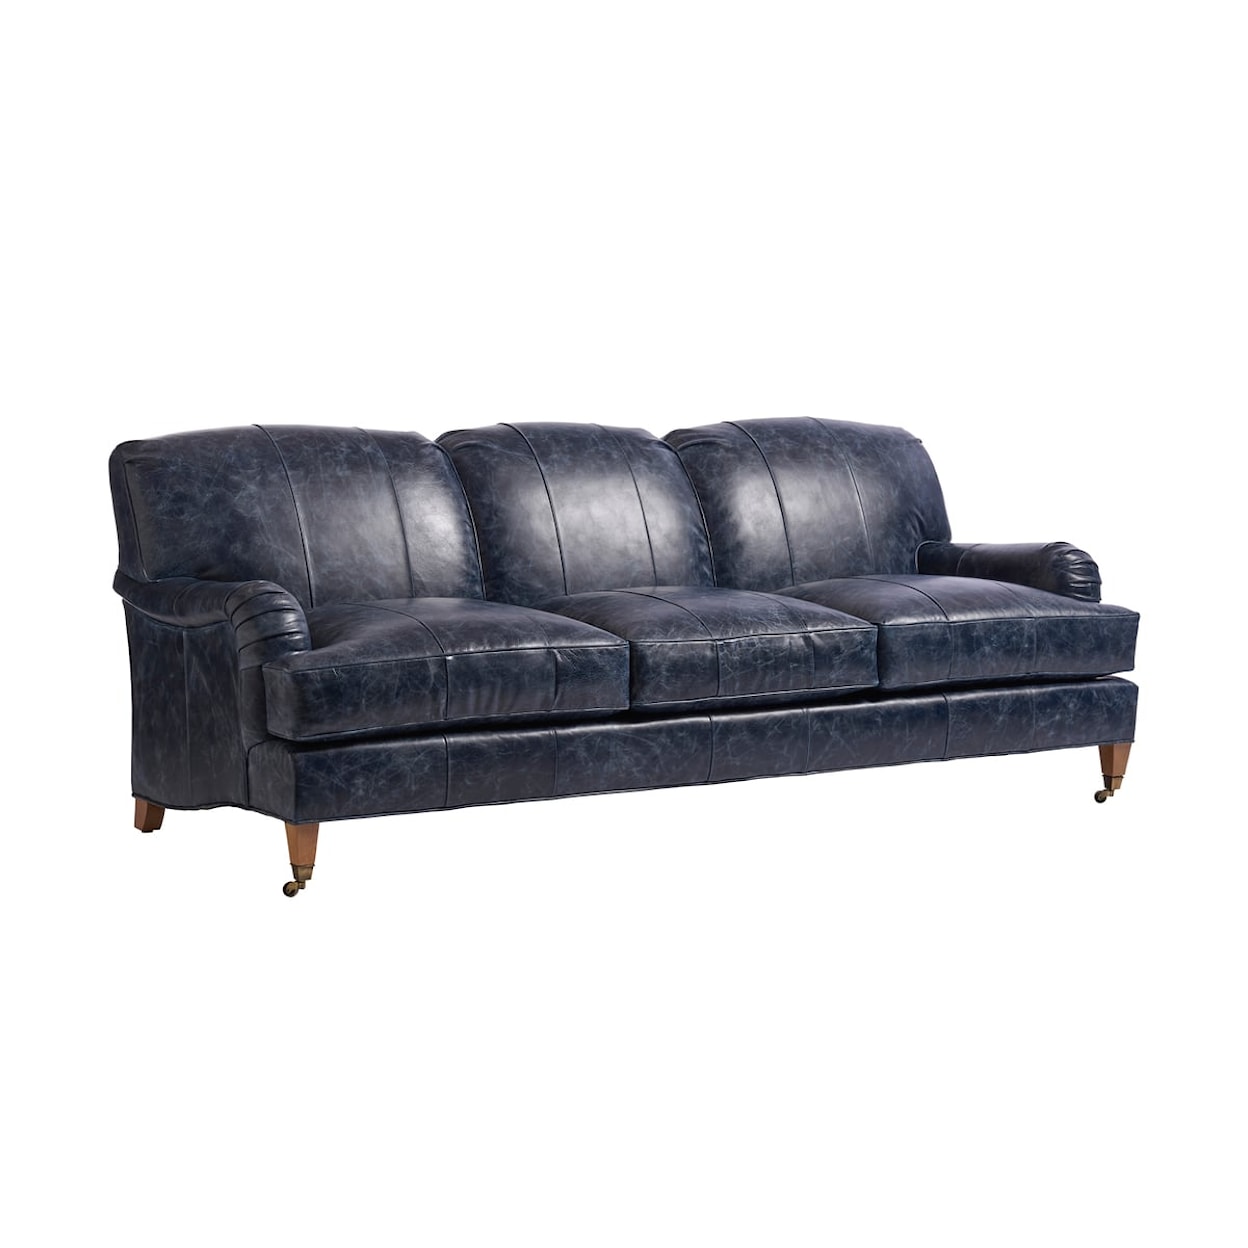 Barclay Butera Barclay Butera Upholstery Sydney Leather Sofa With Pewter Caster